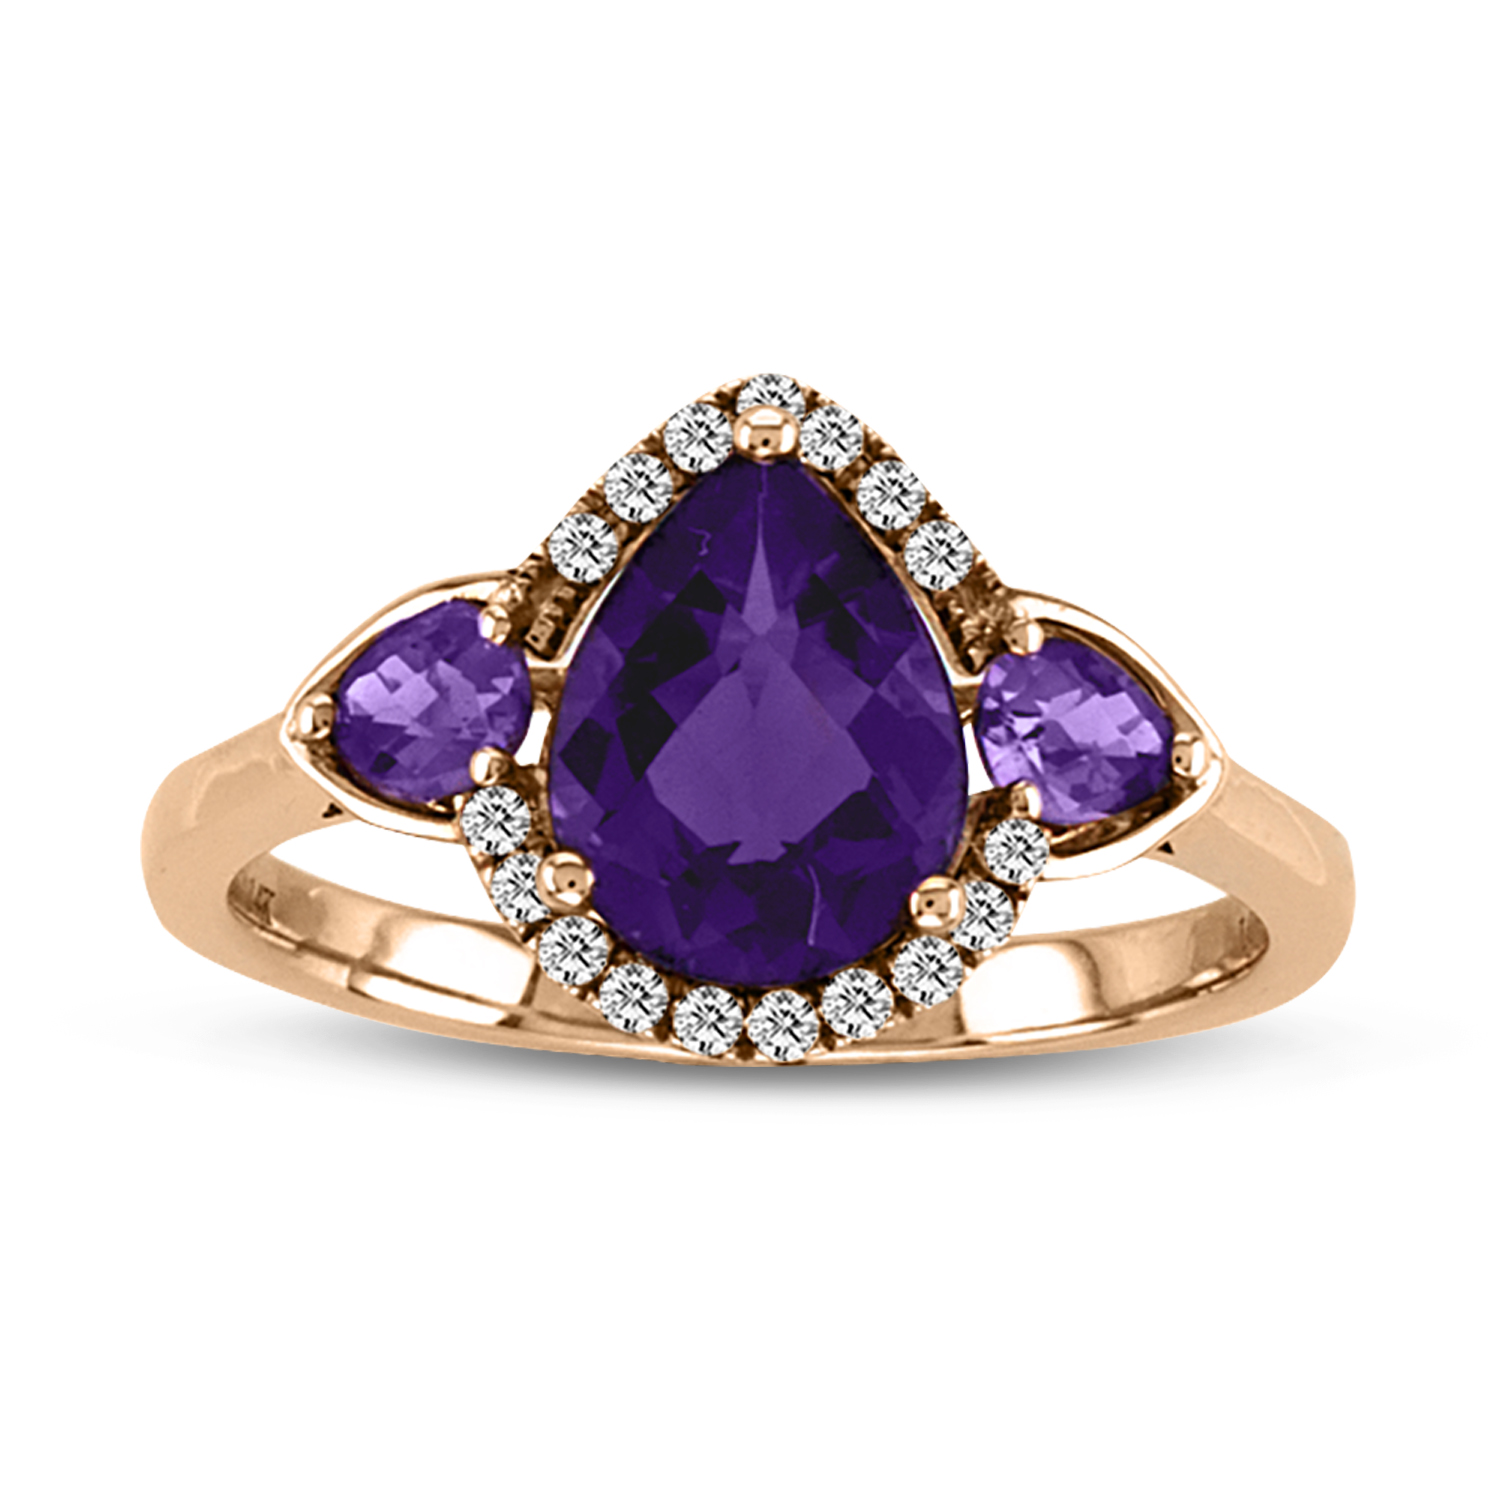 View Diamond and Amethyst Fashion Ring in 14k Rose Gold